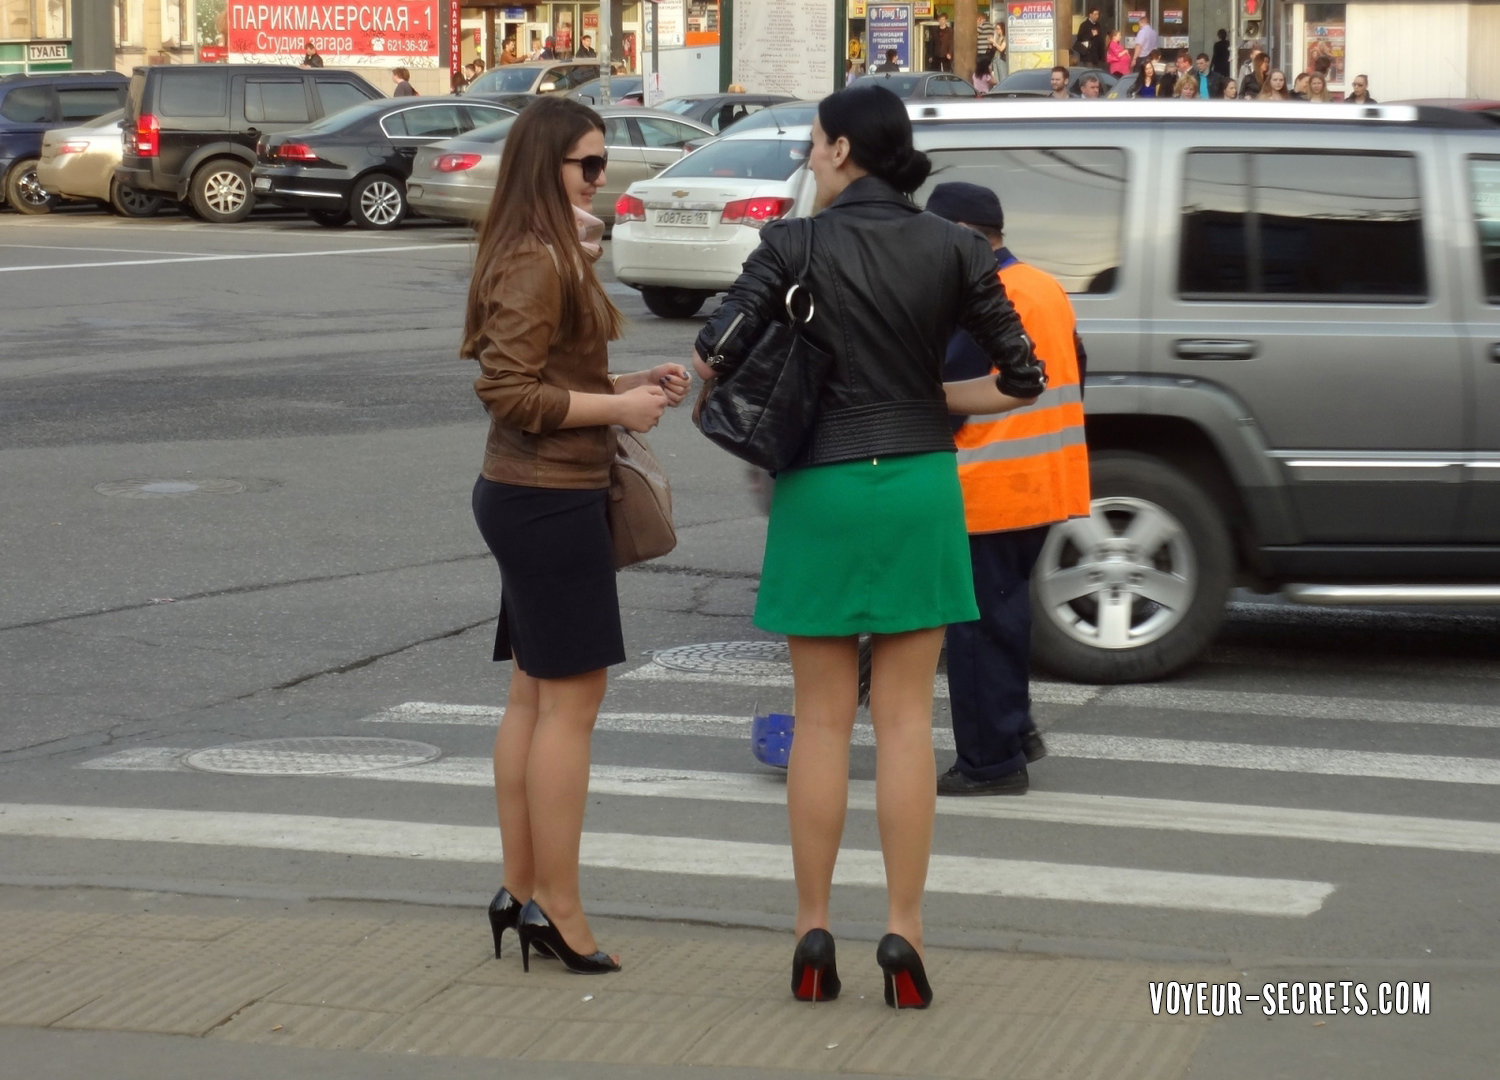 Hot women in skirts on the street